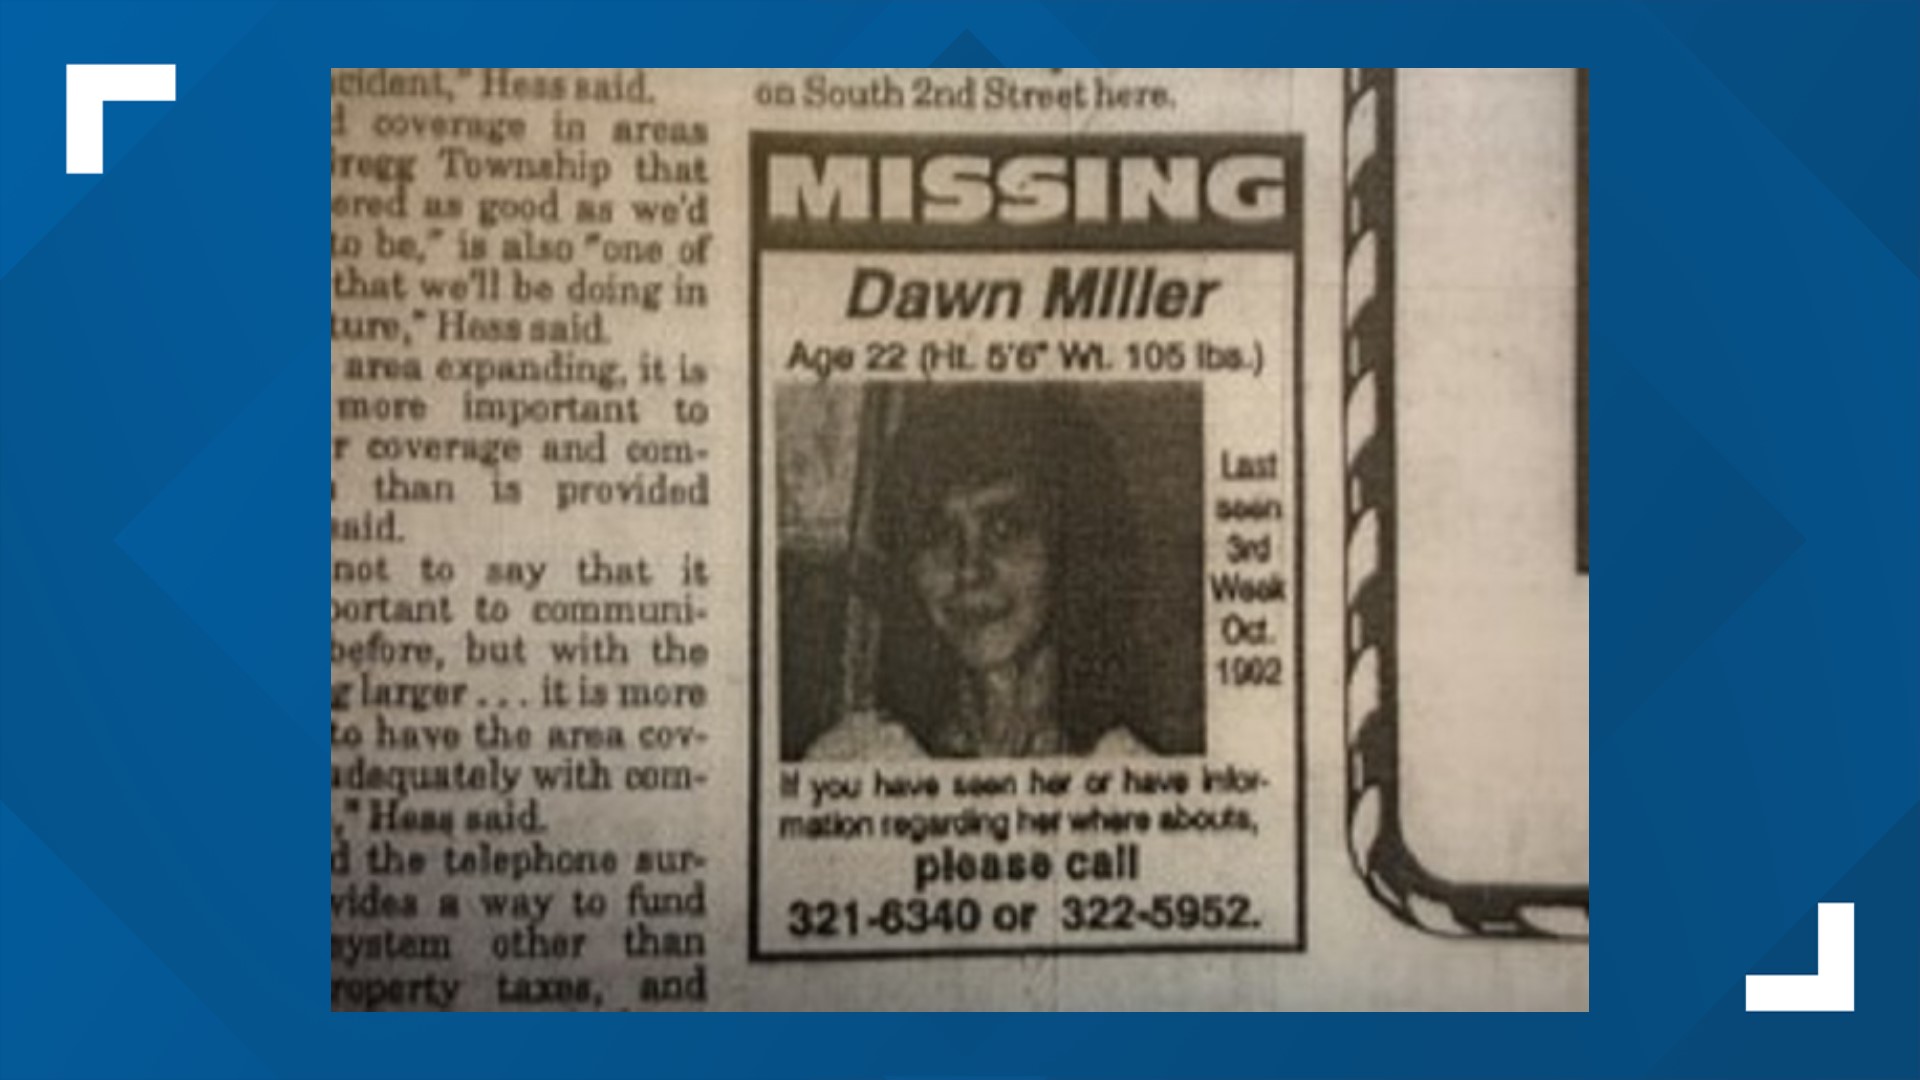 Though officially considered a cold case, the disappearance of 22-year-old Dawn Miller on the night of Oct. 24, 1992, may already be solved.